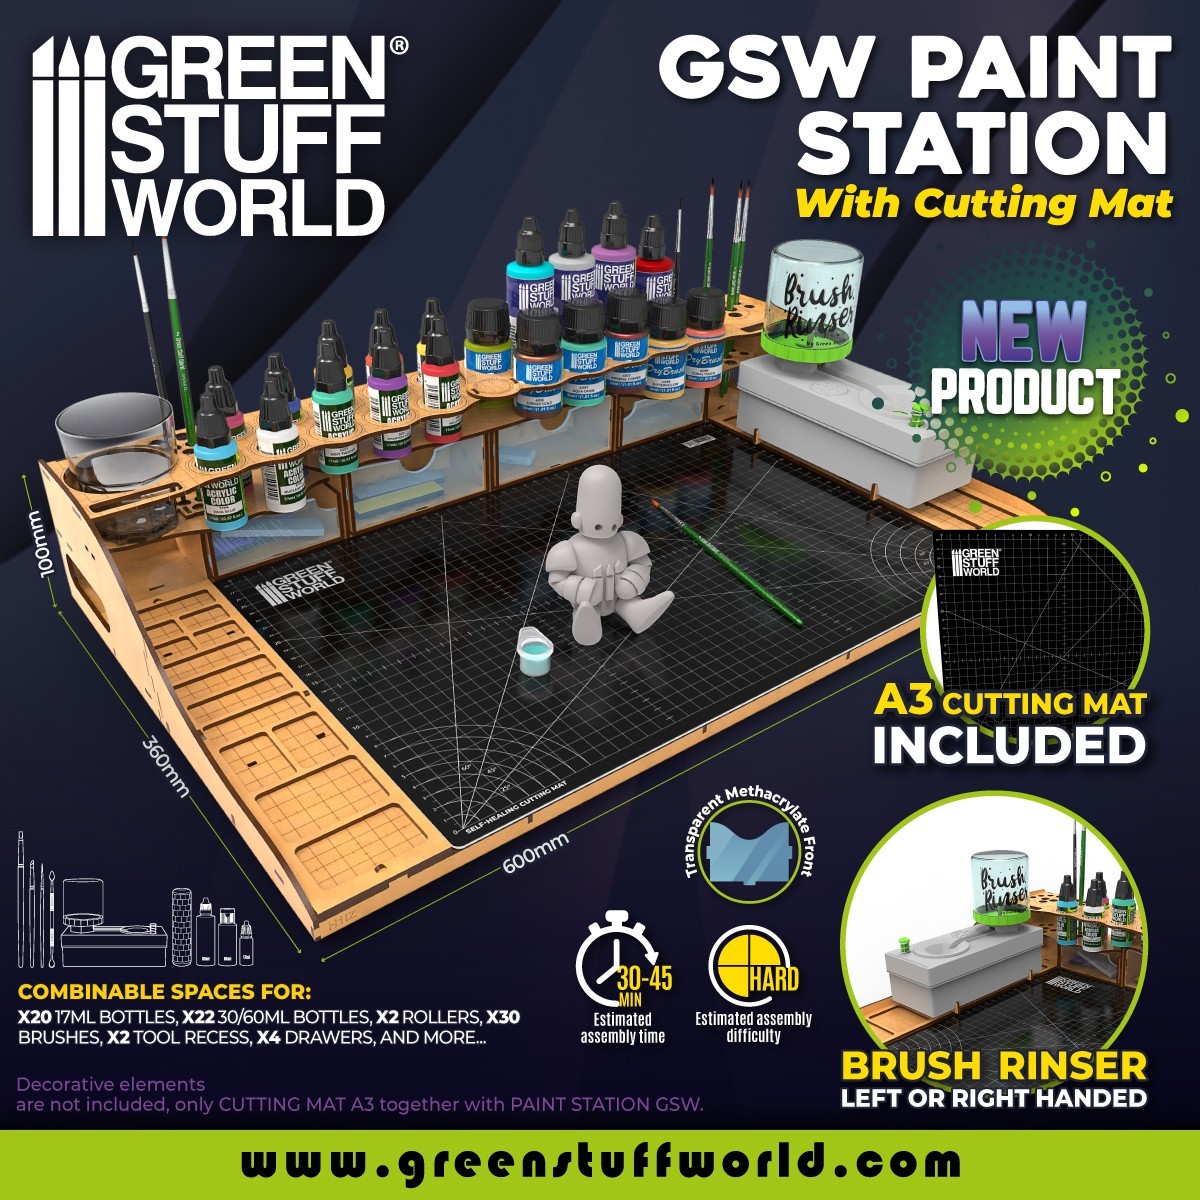 How To Use The GSW Brush Rinser